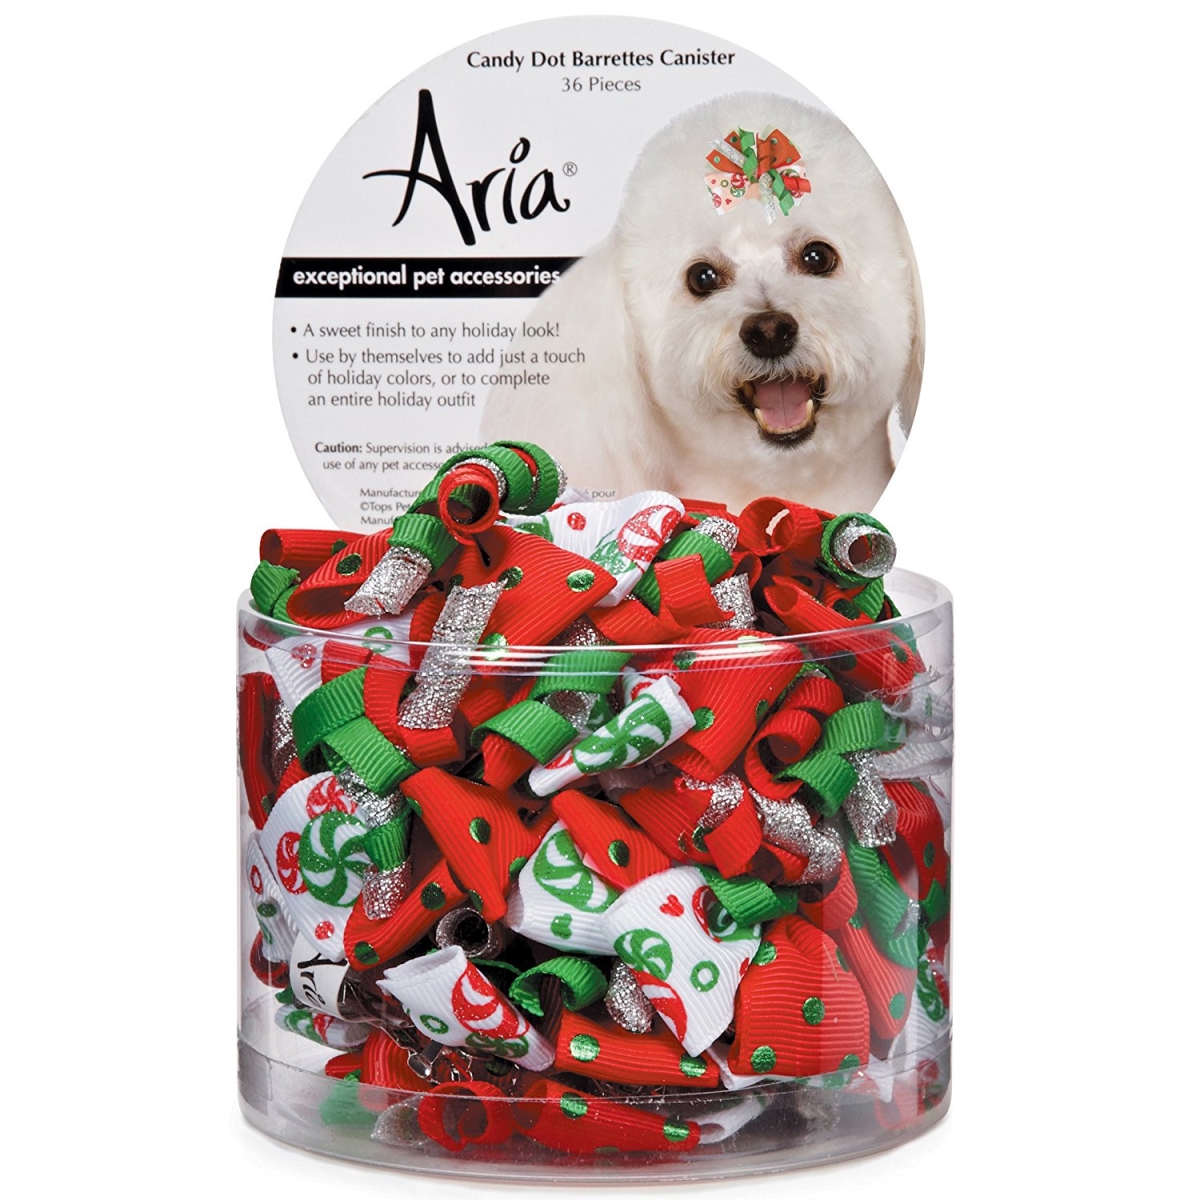 Picture of Aria Candy Dot Barrette Canister, 36 Piece